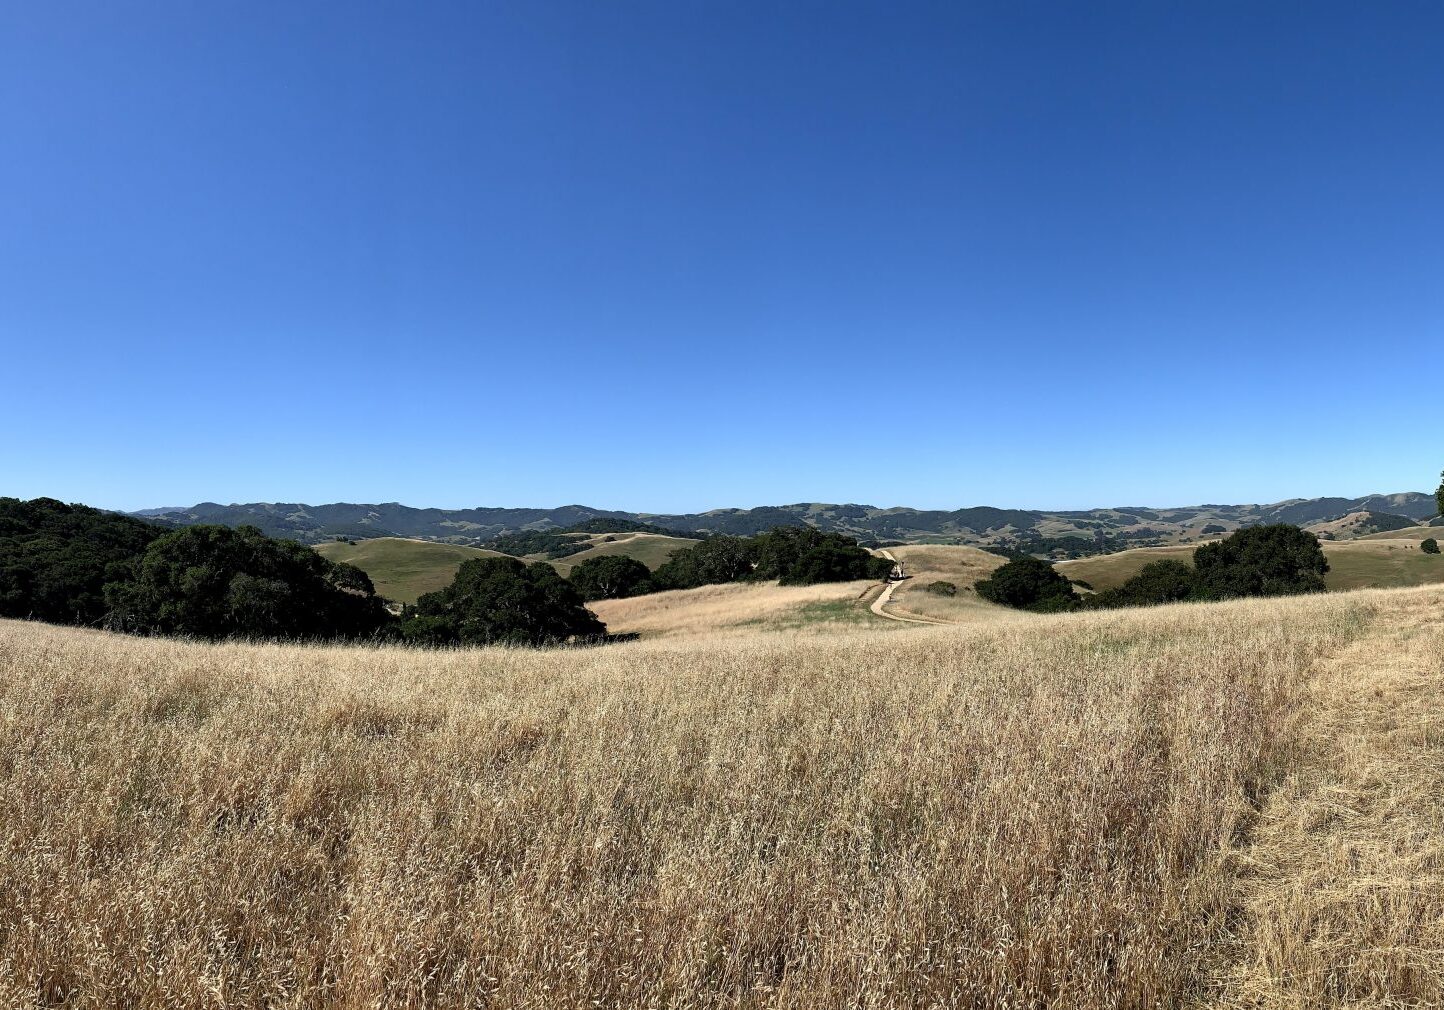 panoramic photo taken standing on a high point of an open grassy area with gentle rolling hills of a golden/tan color a few green old oak trees in the distnce and a very blue cloudless sky